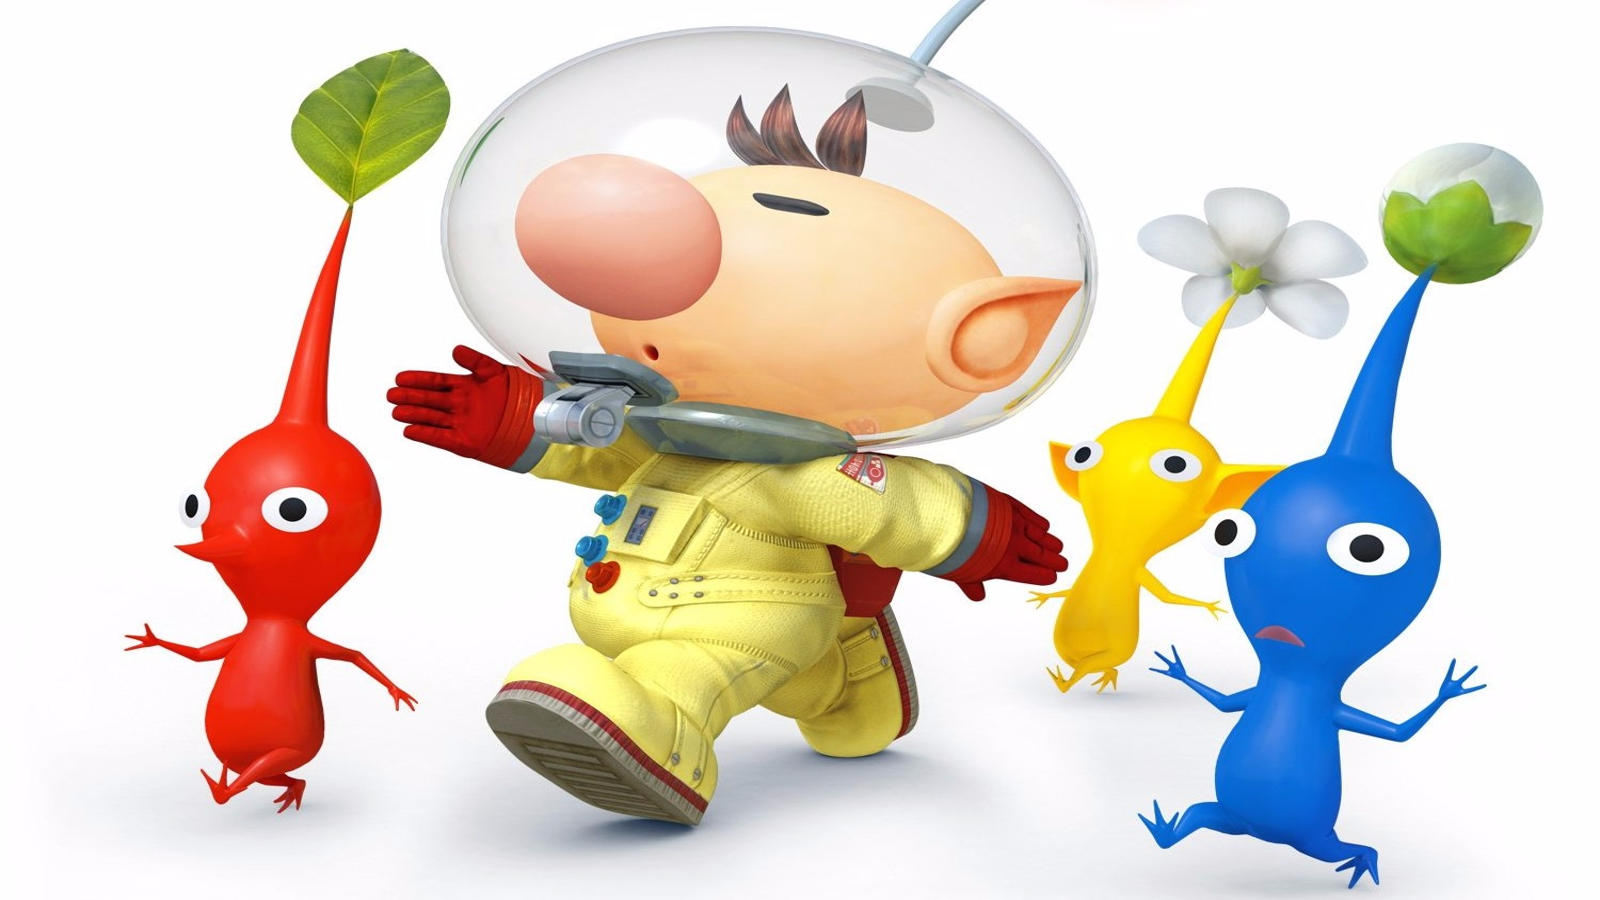 Pikmin 4 delivers an Unreal improvement over its predecessors